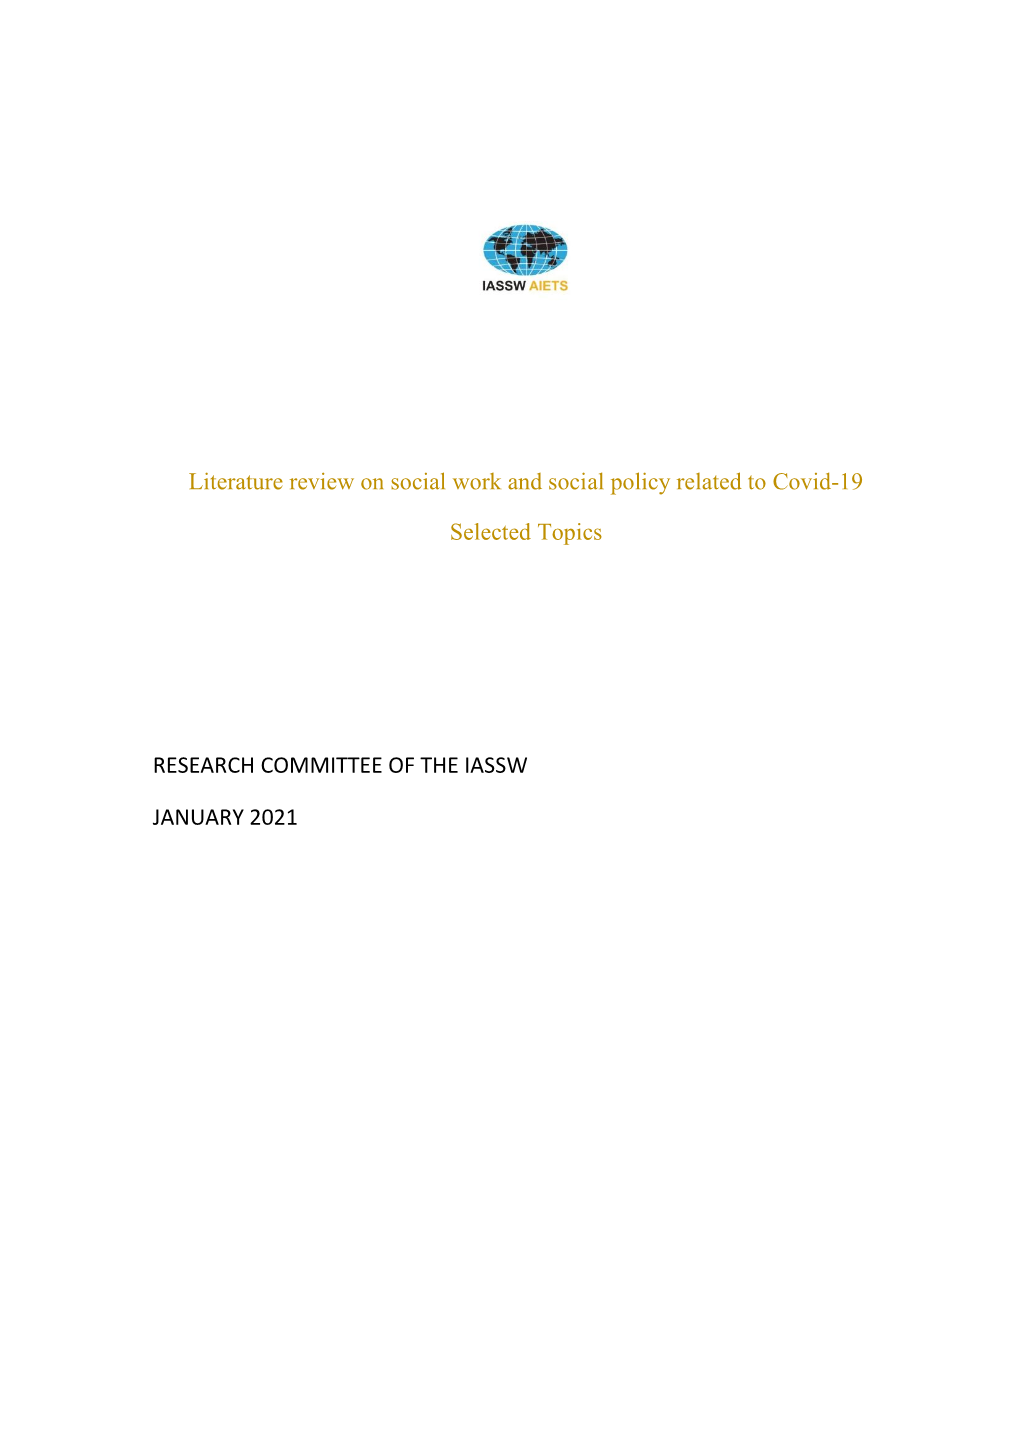 Literature Review on Social Work and Social Policy Related to Covid-19